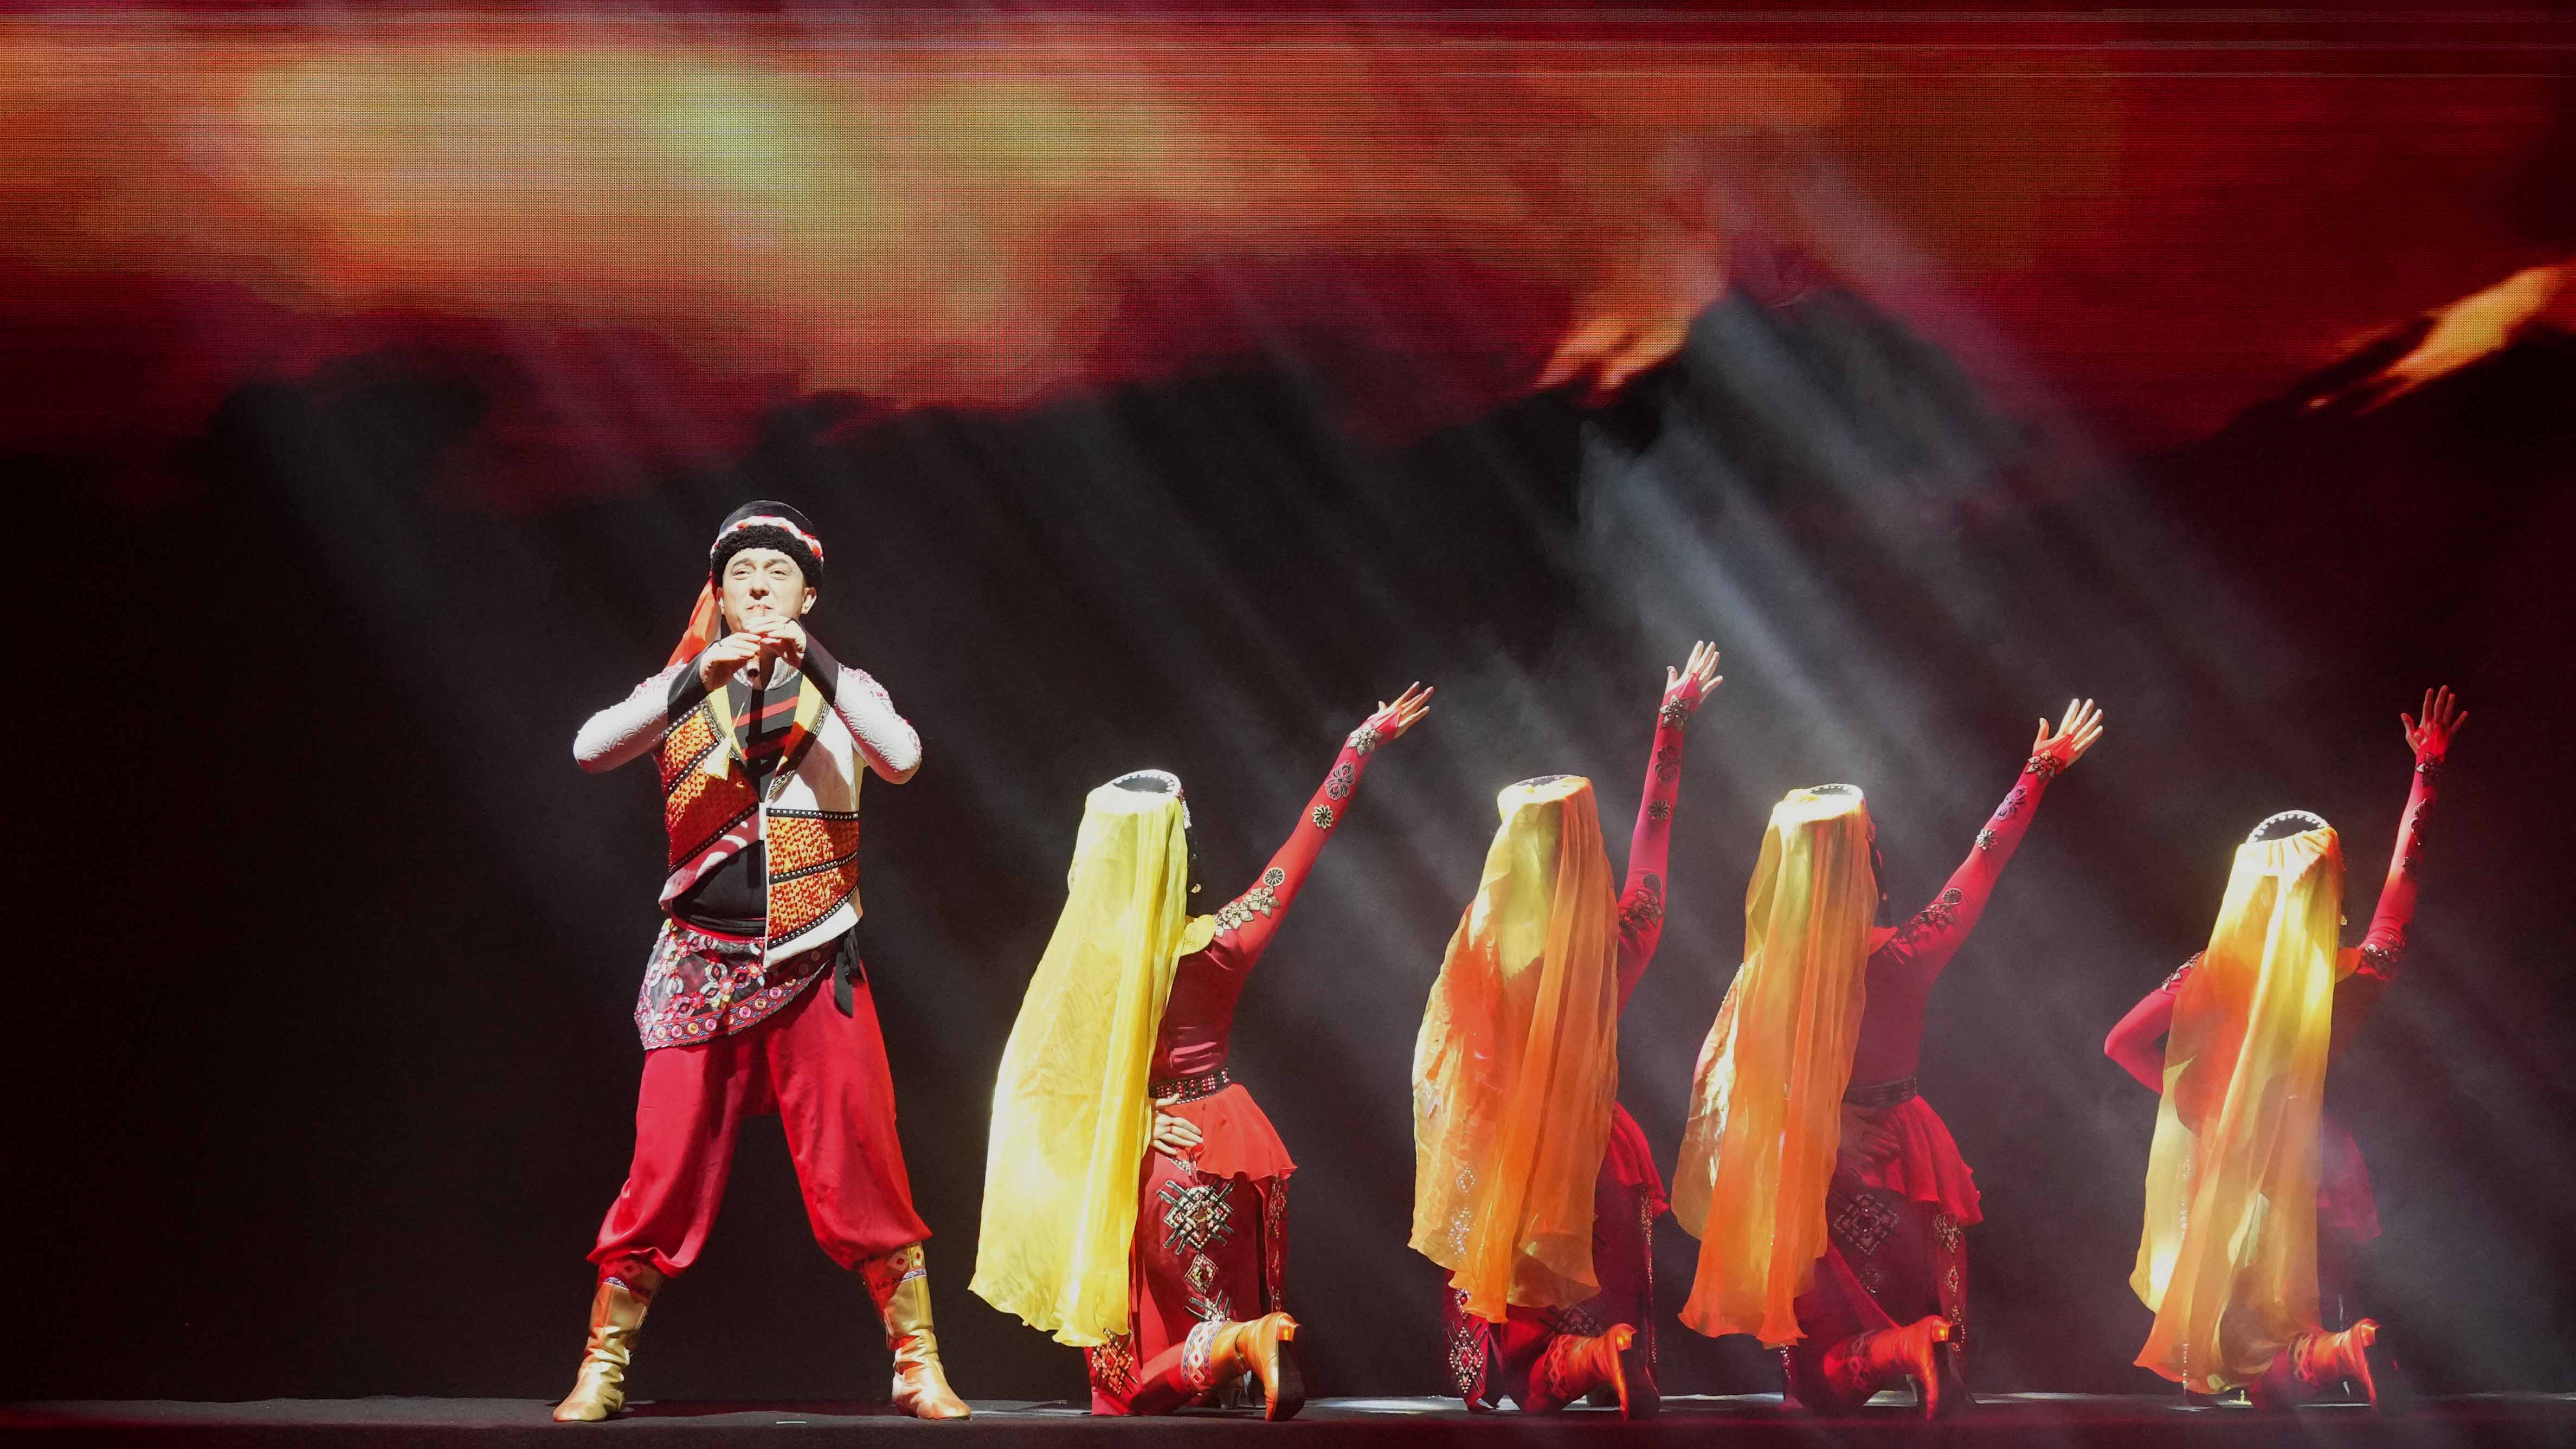 The performance embodied the authentic culture of the Xinjiang Uygur Autonomous Region.